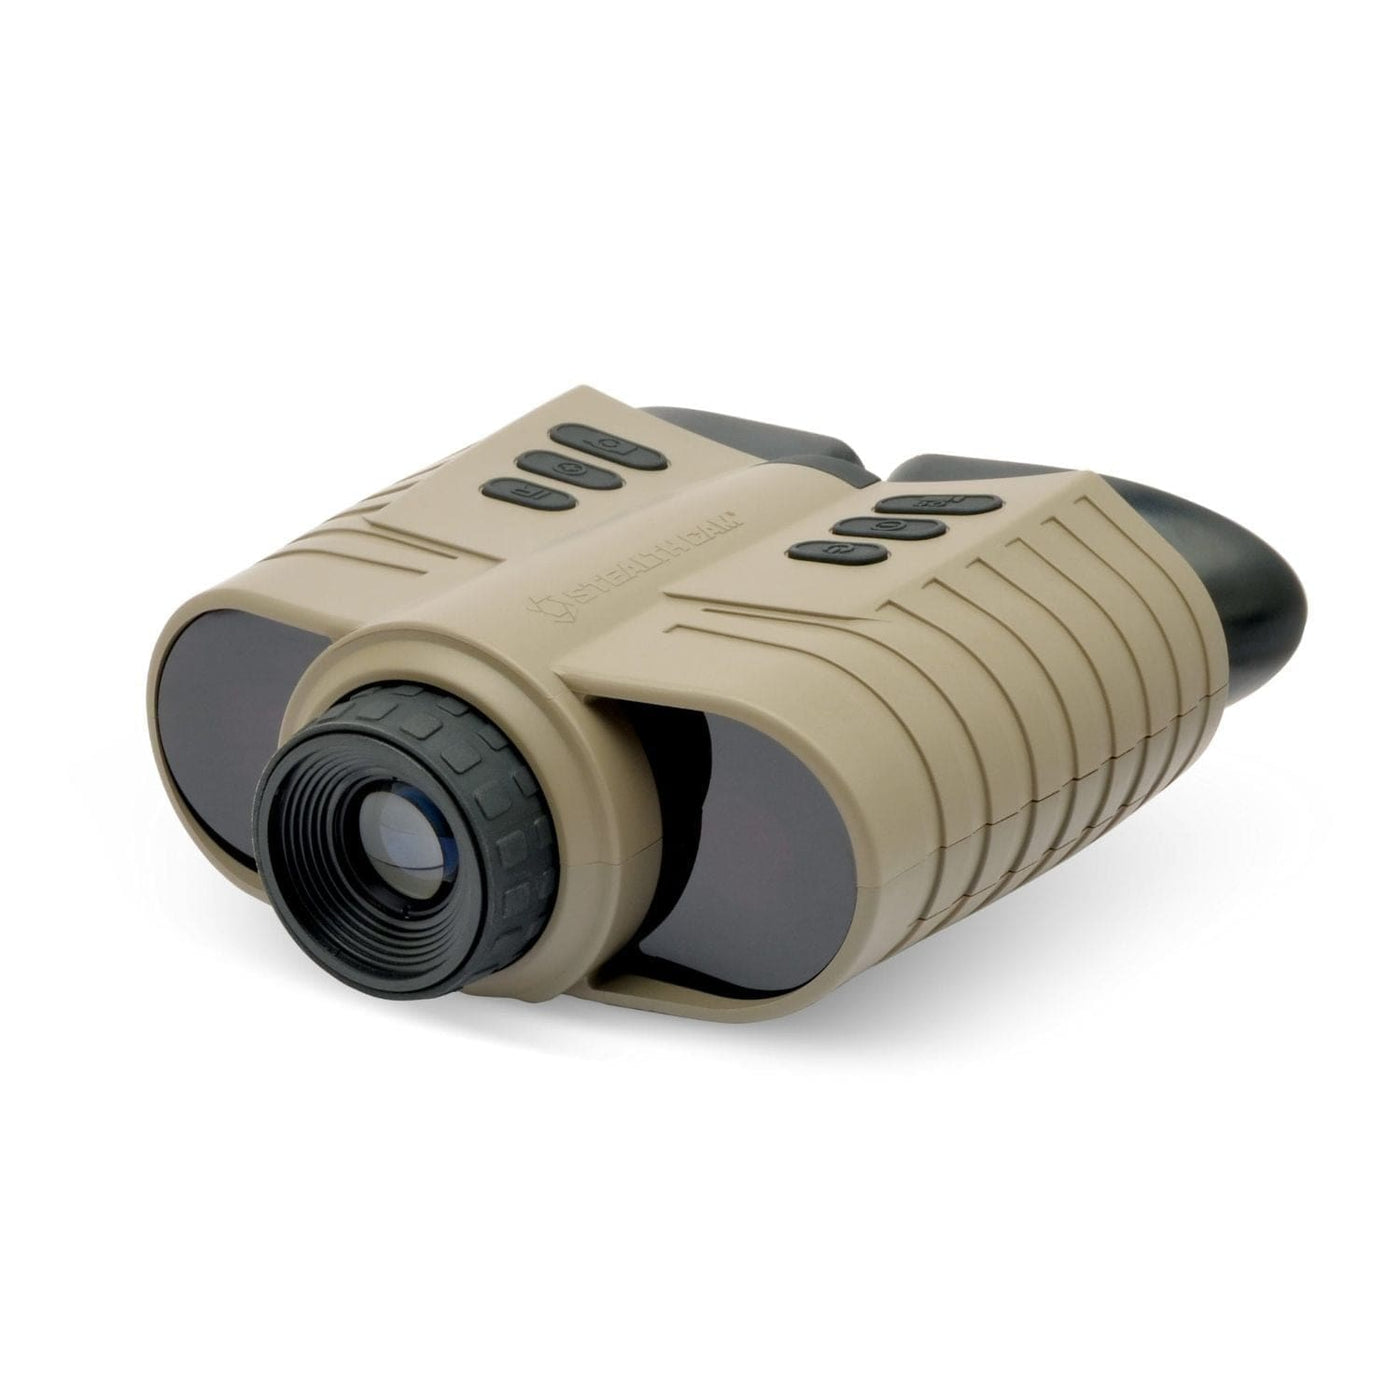 Stealth Cam Stealth Cam Digital Night Vision Binocular with Recording Nightvision And Thermal